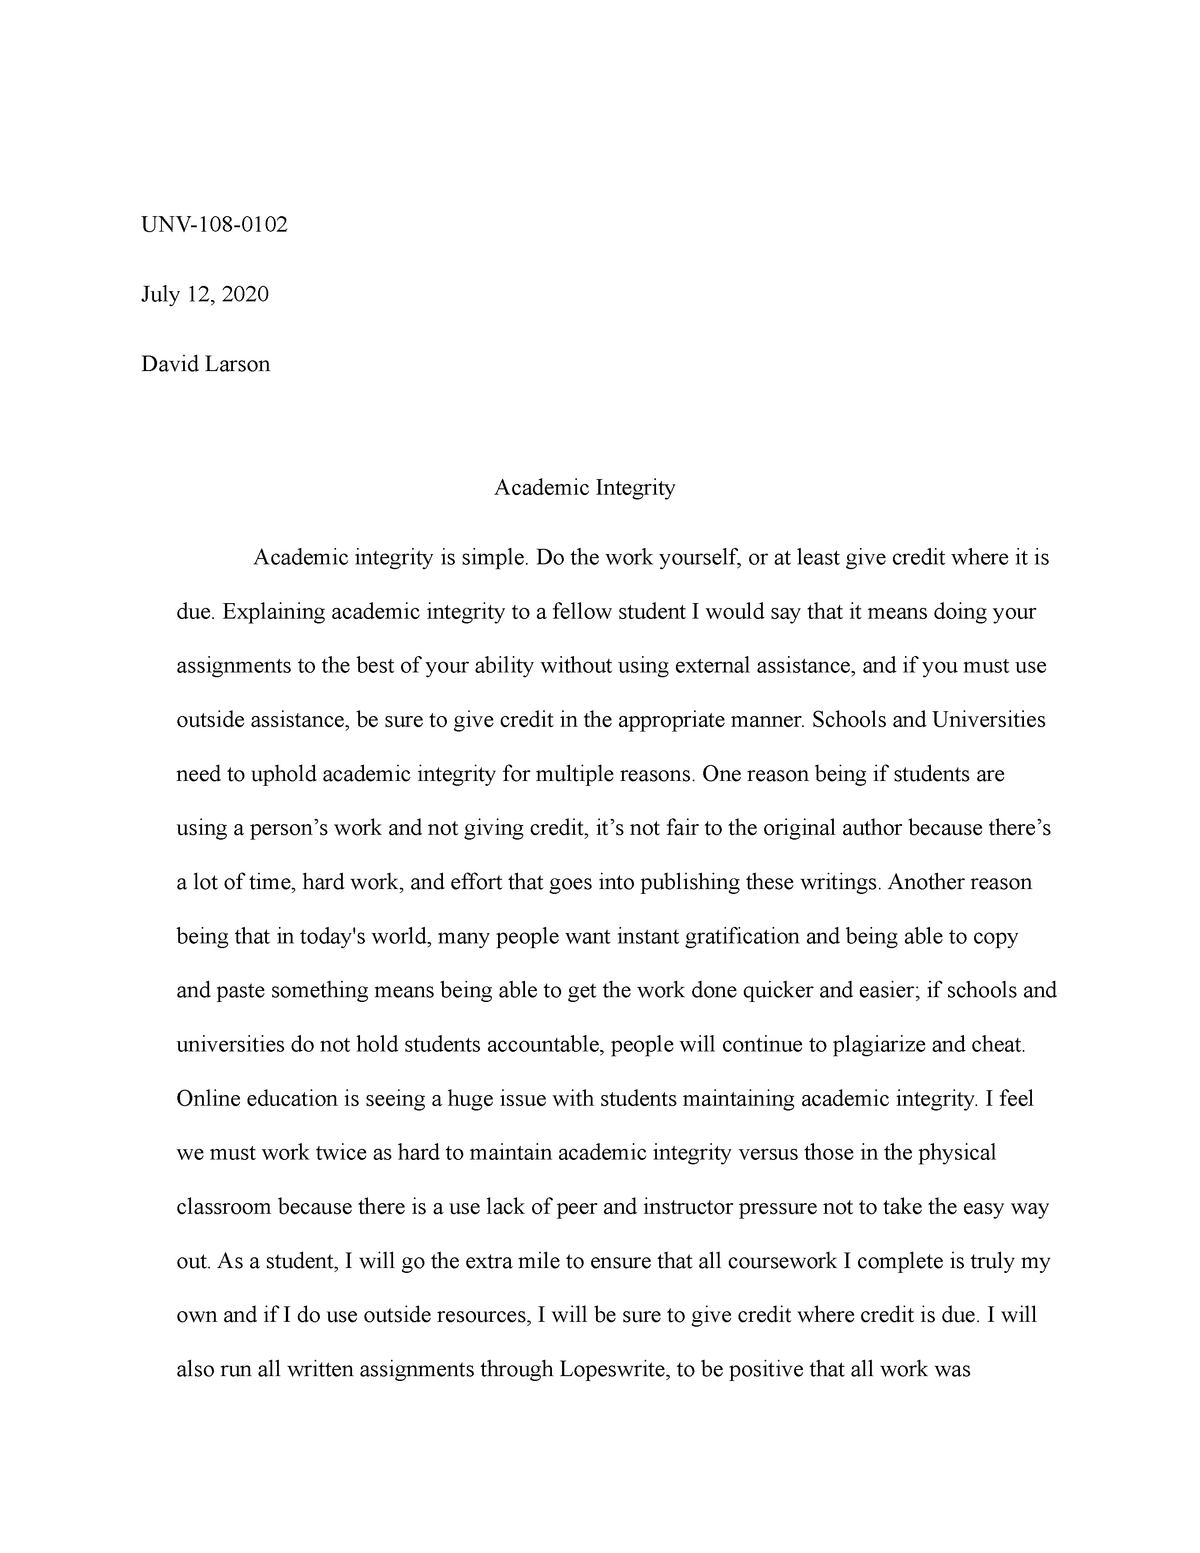 academic integrity essay conclusion